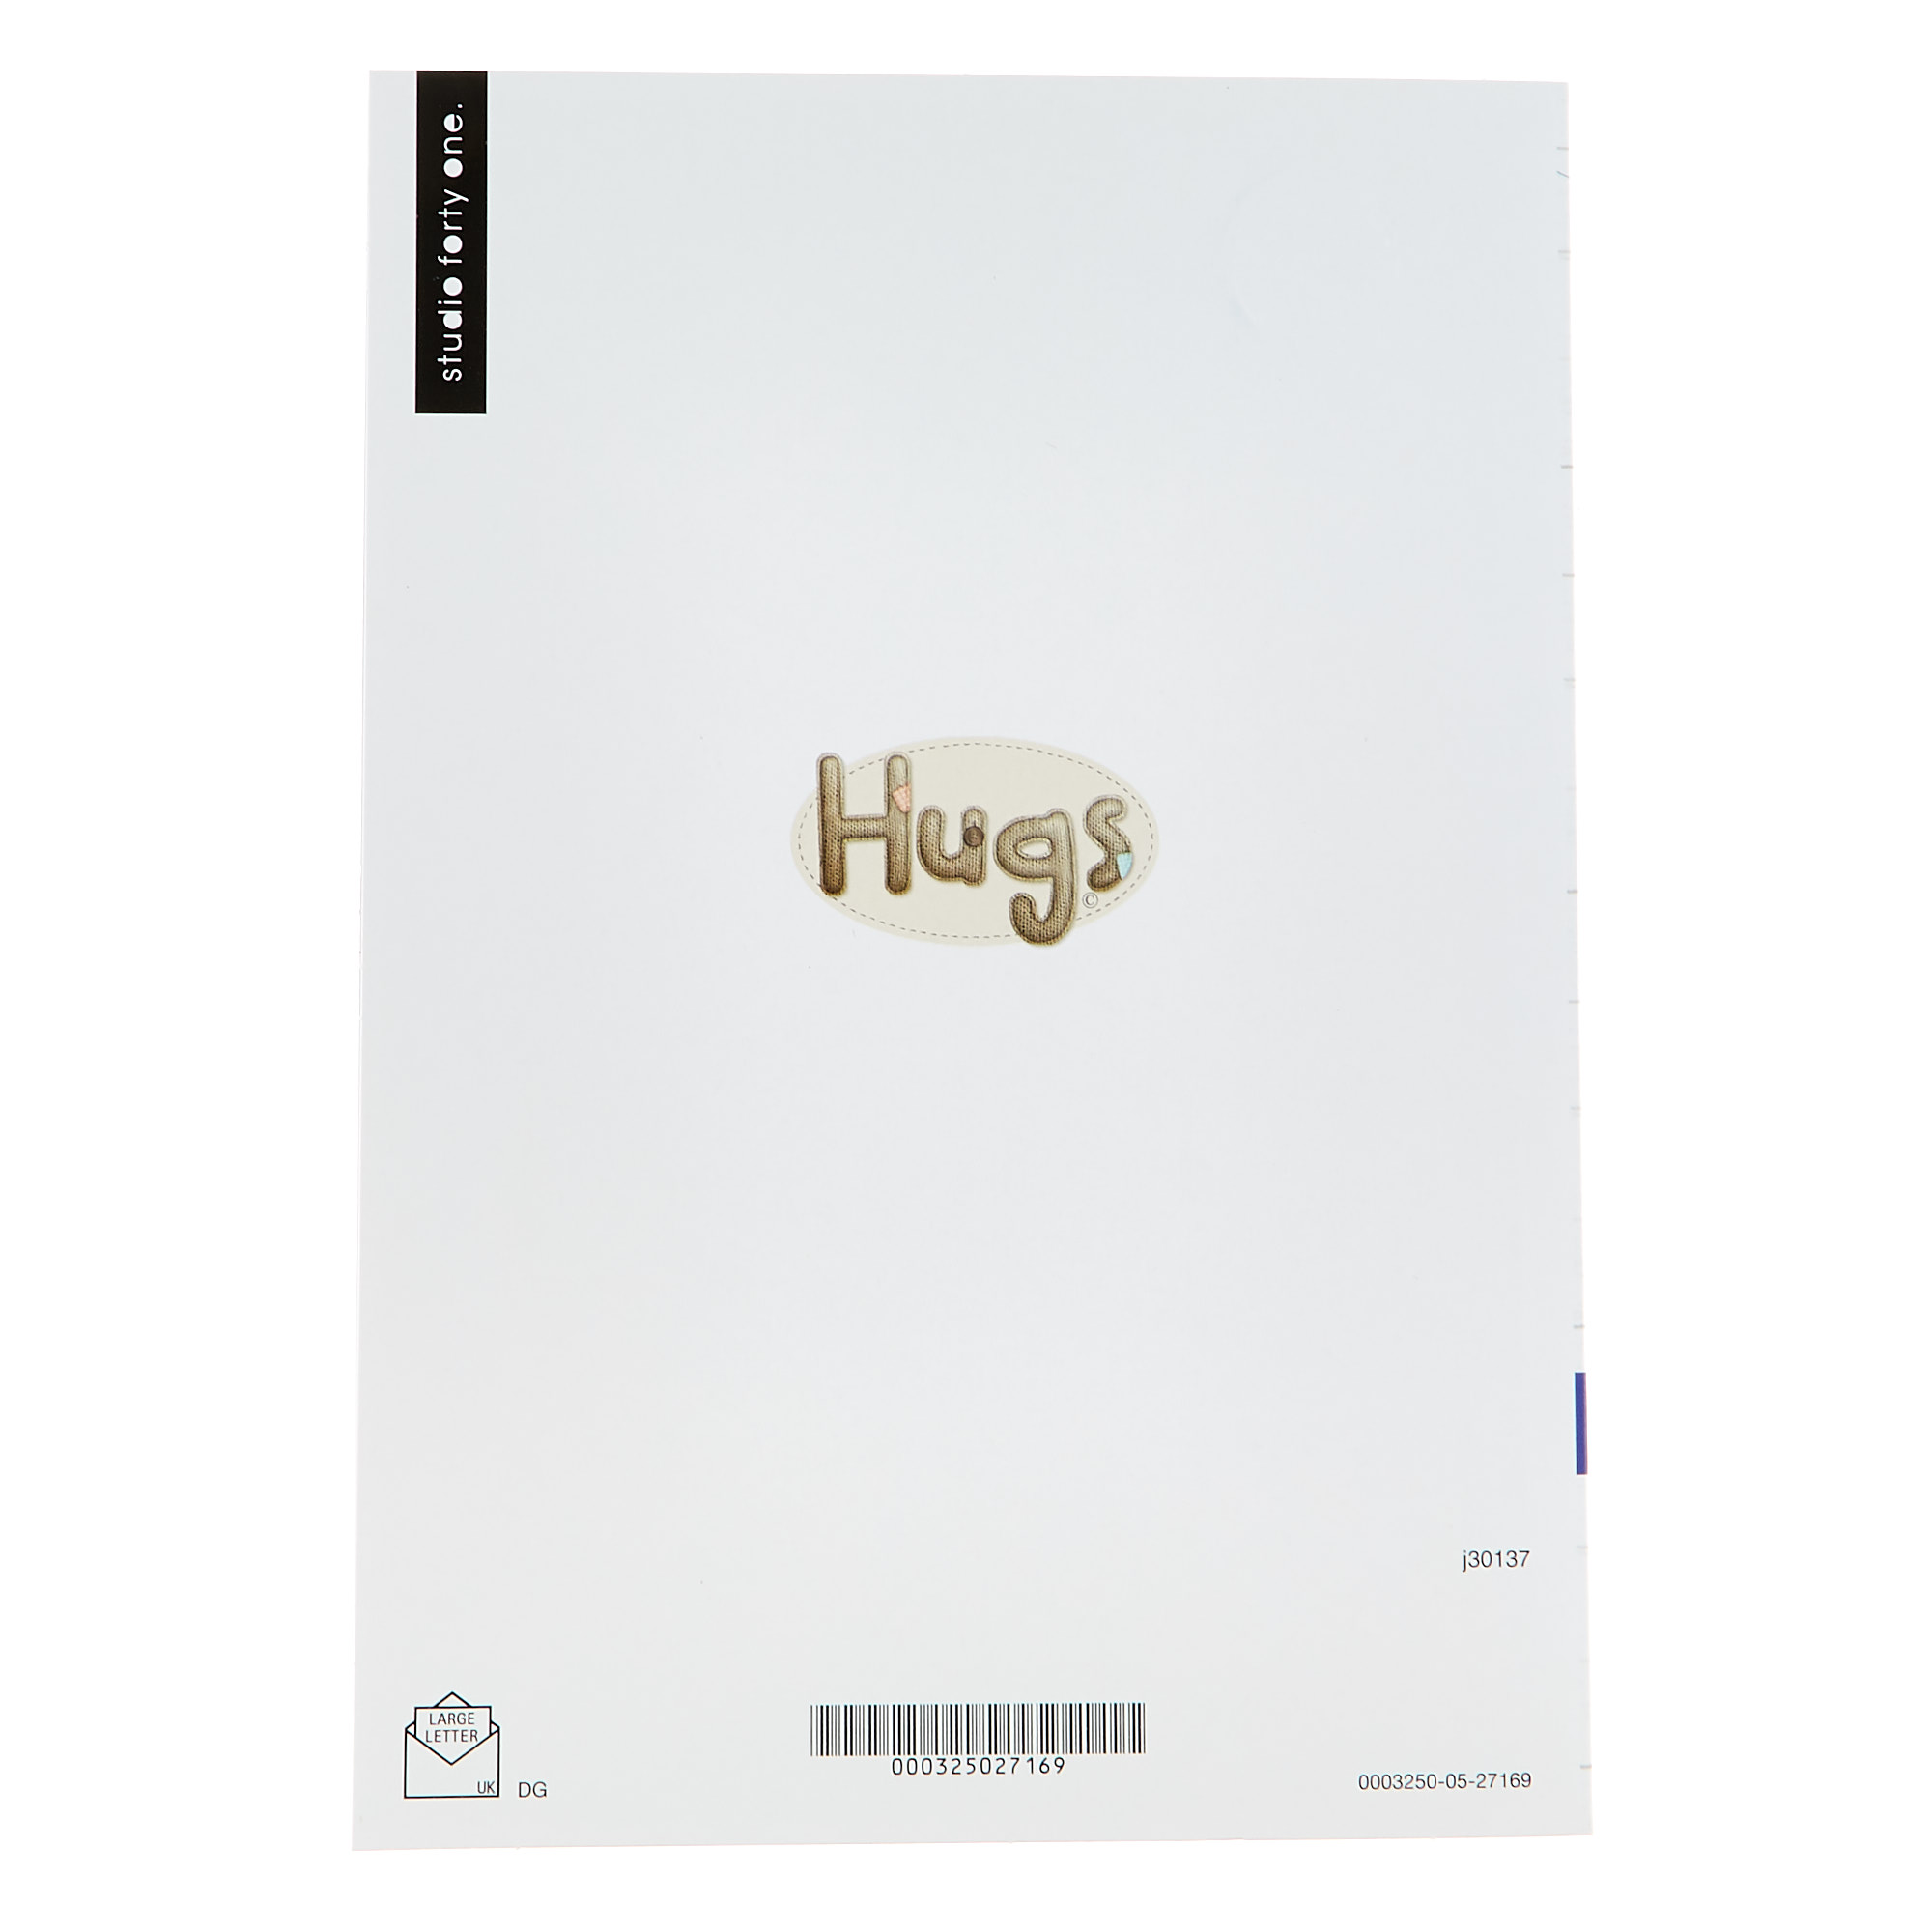 Hugs Bear Birthday Cards - Hit The Deck (Pack of 12)